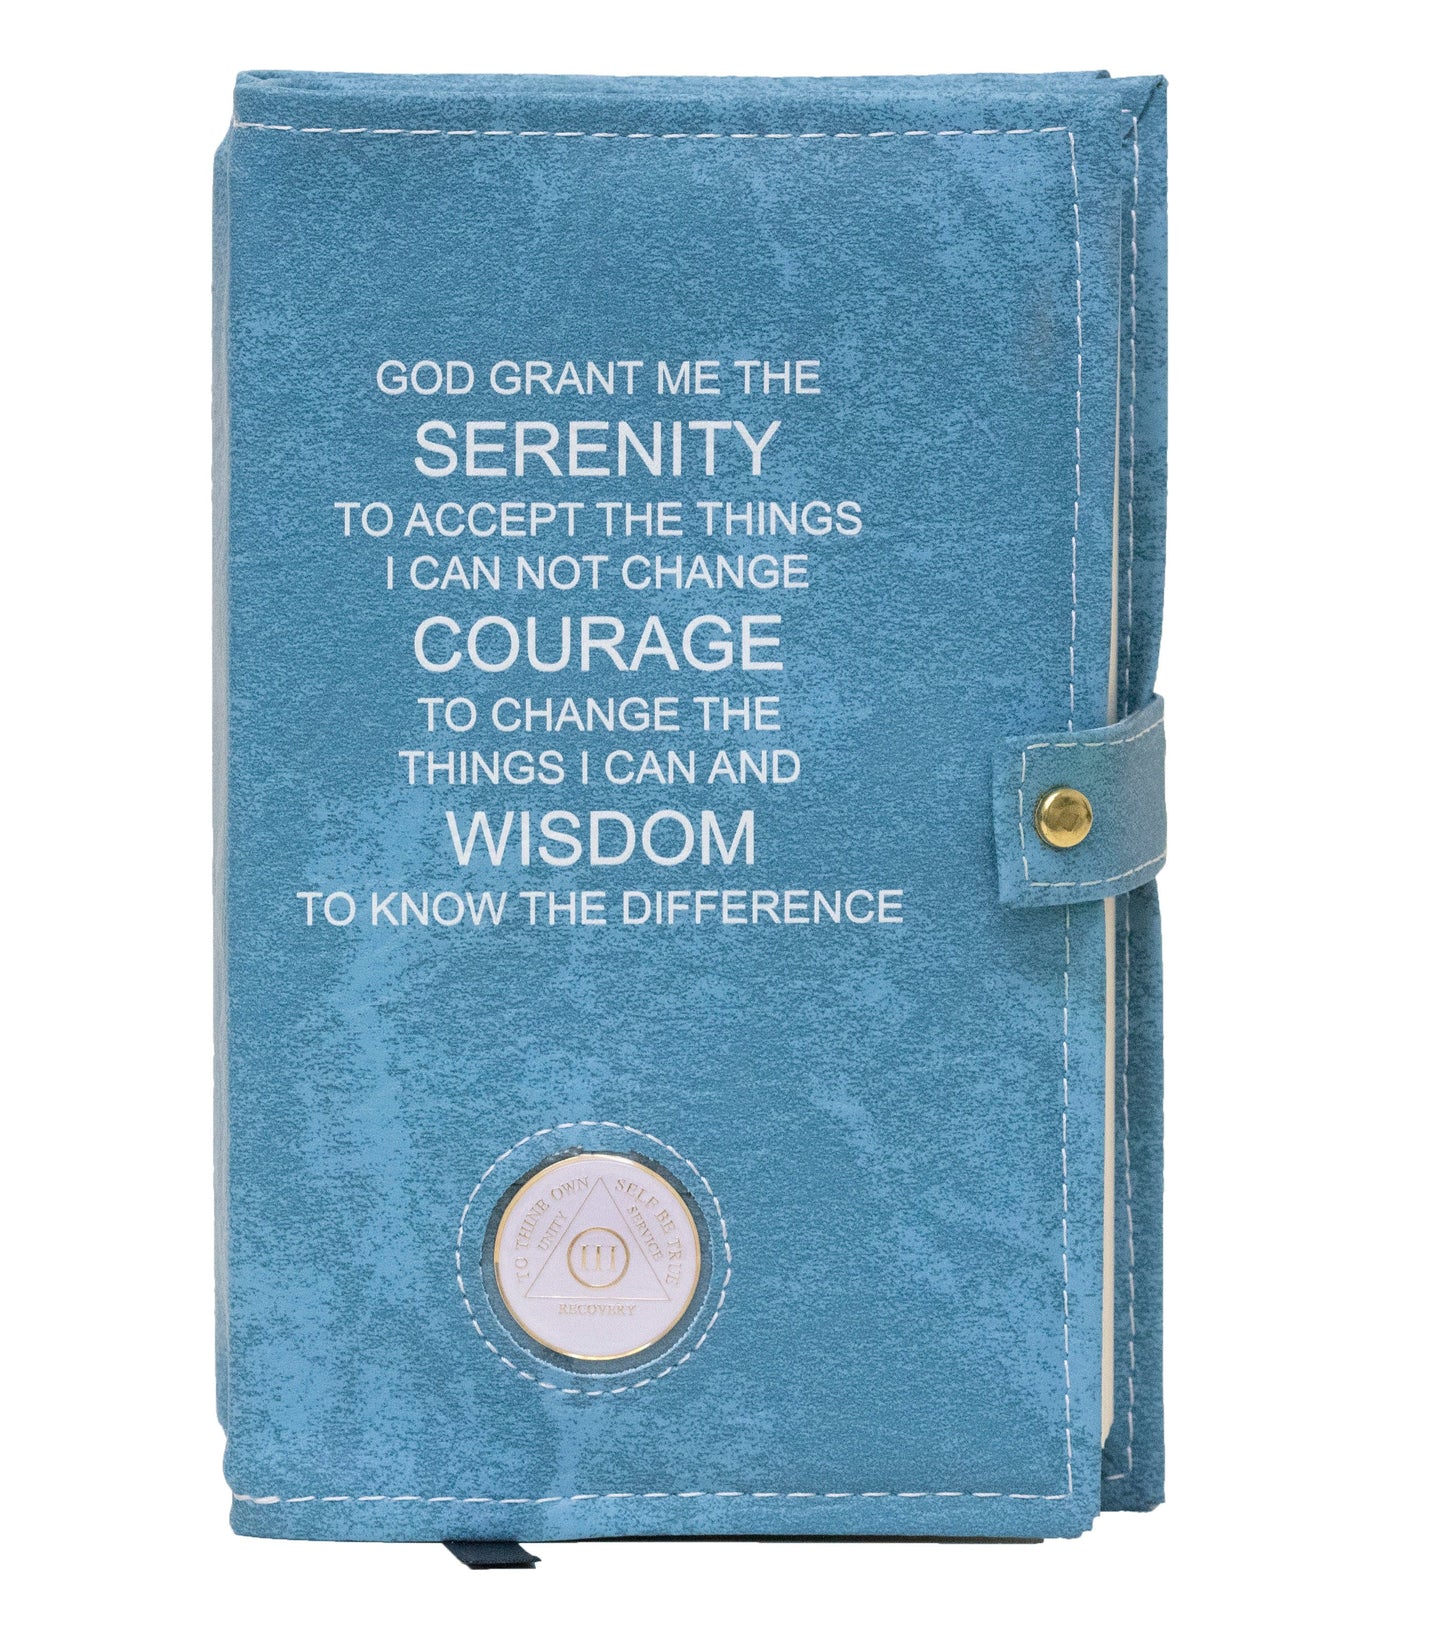 AA Sky Blue Double Book Cover With The Serenity Prayer, With Sobriety Chip Holder